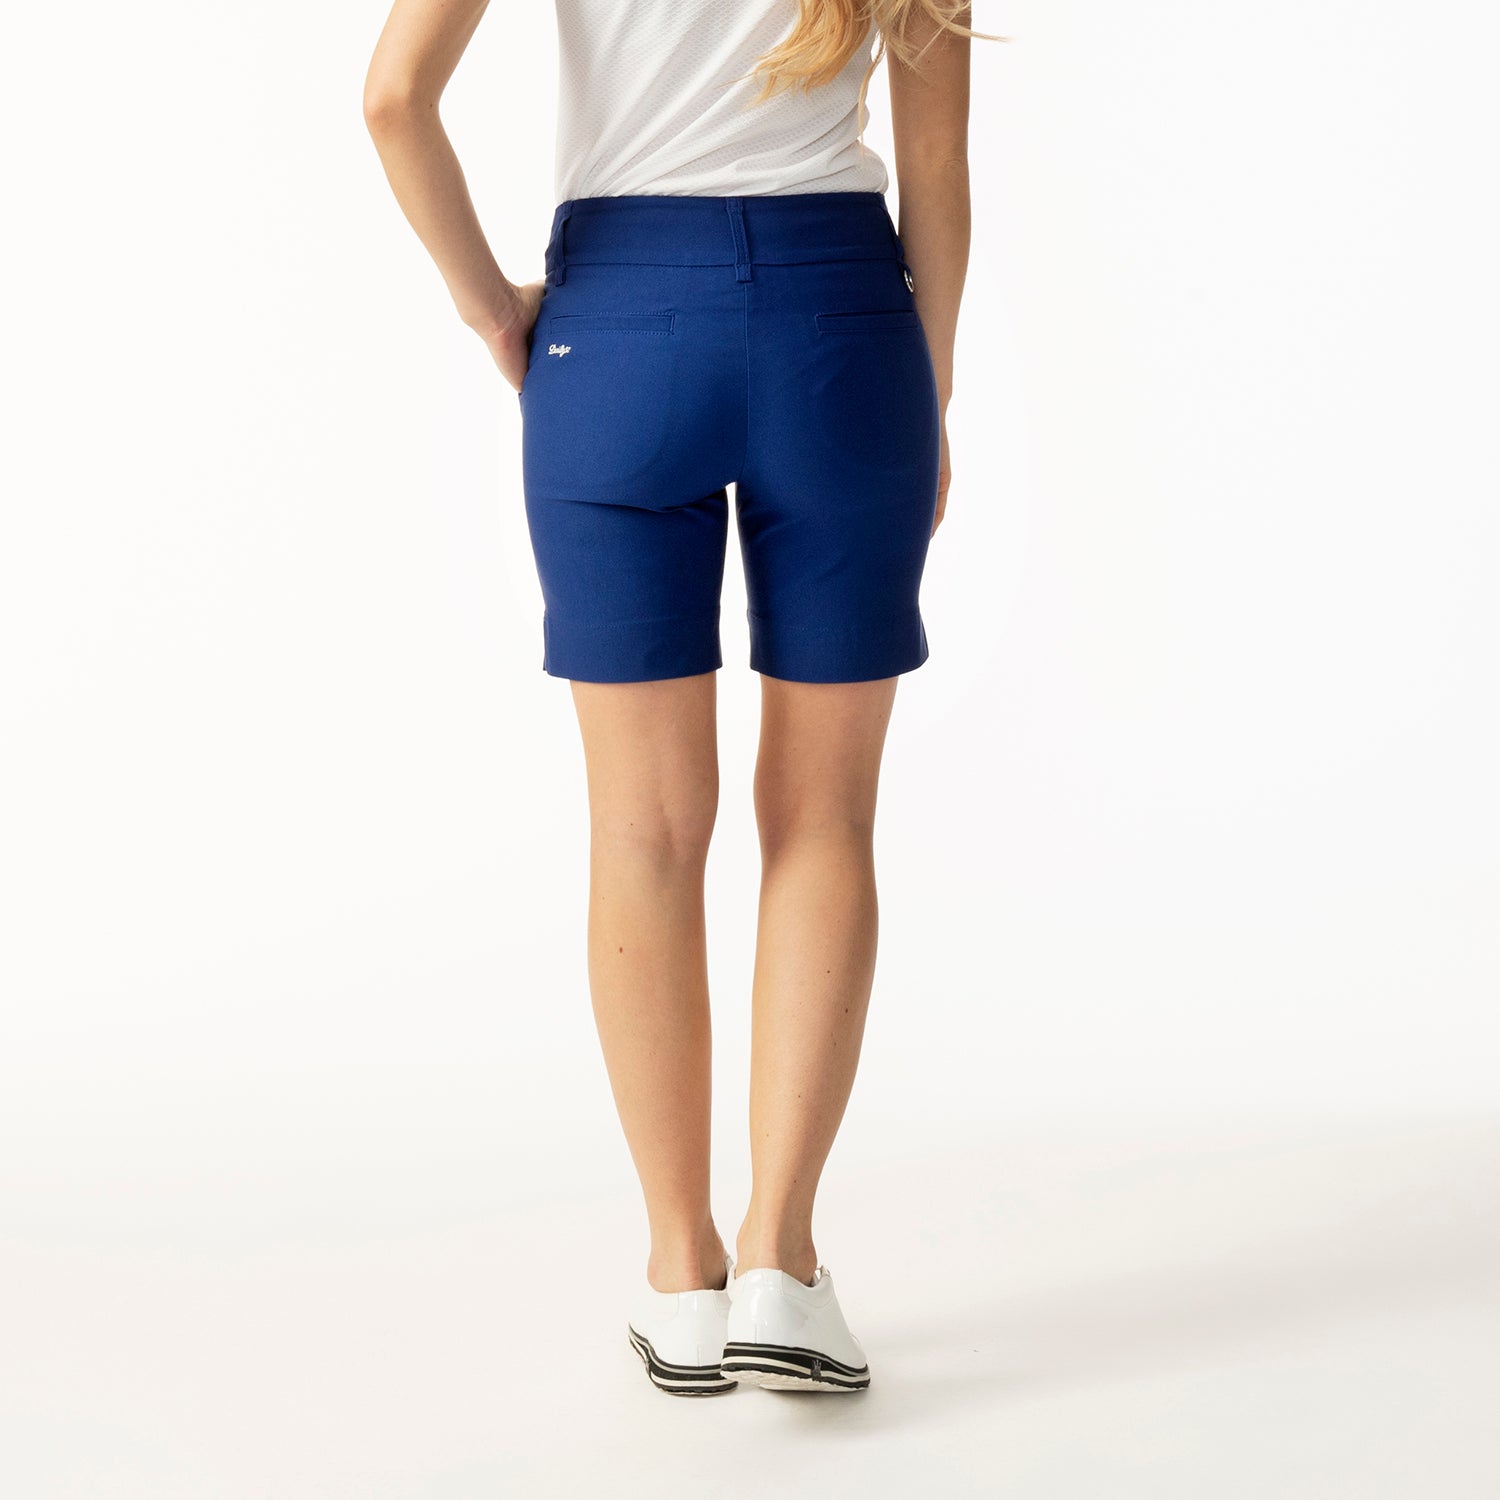 Daily Sports Ladies Shorter Length Pull-On Shorts in Spectrum Blue